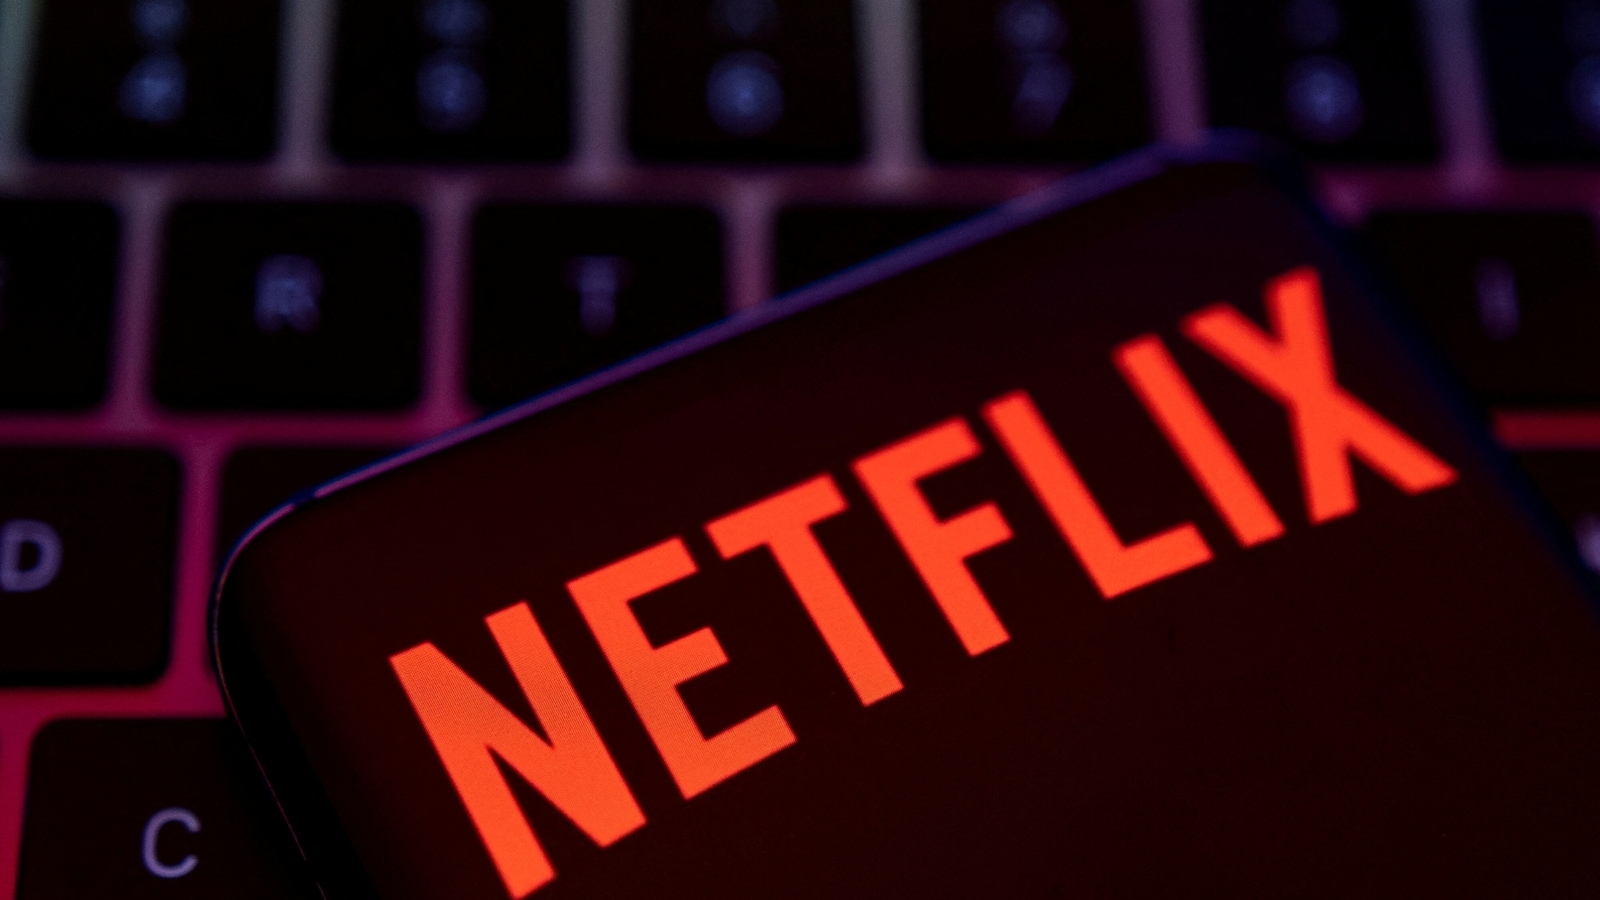 Netflix to make its games playable on more devices